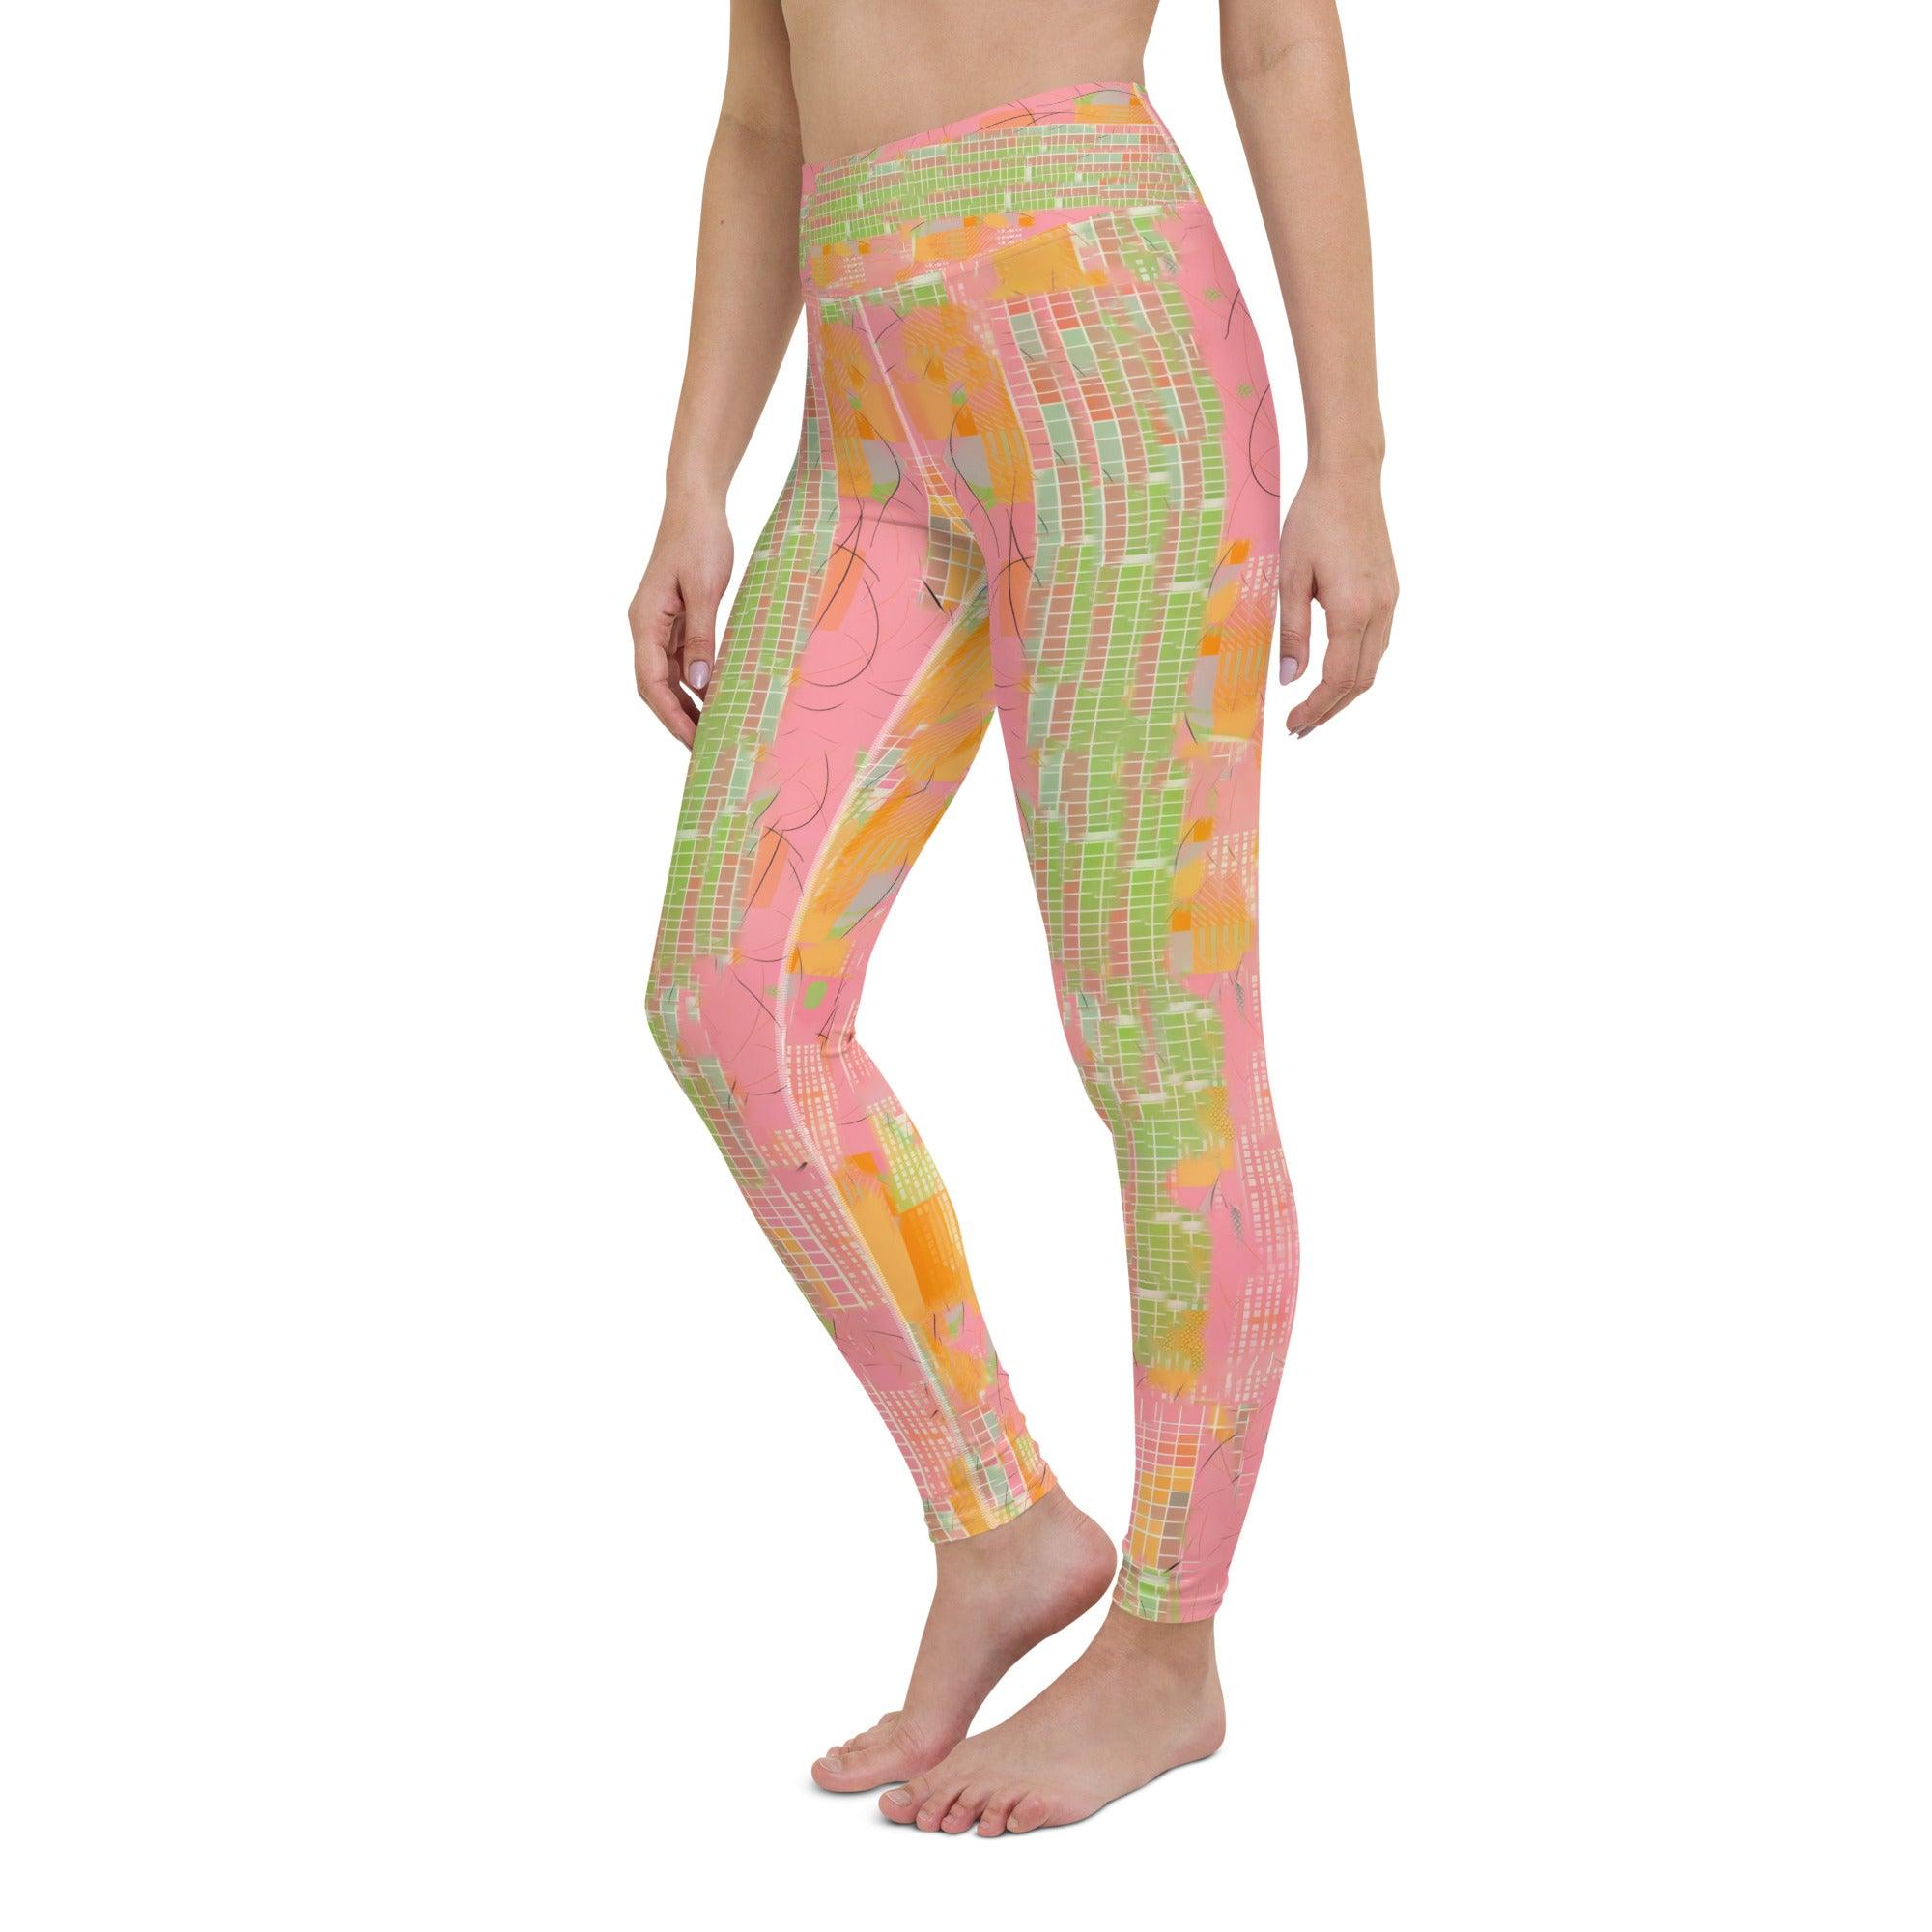 Stylish and comfortable Enraptured leggings for dance and fitness